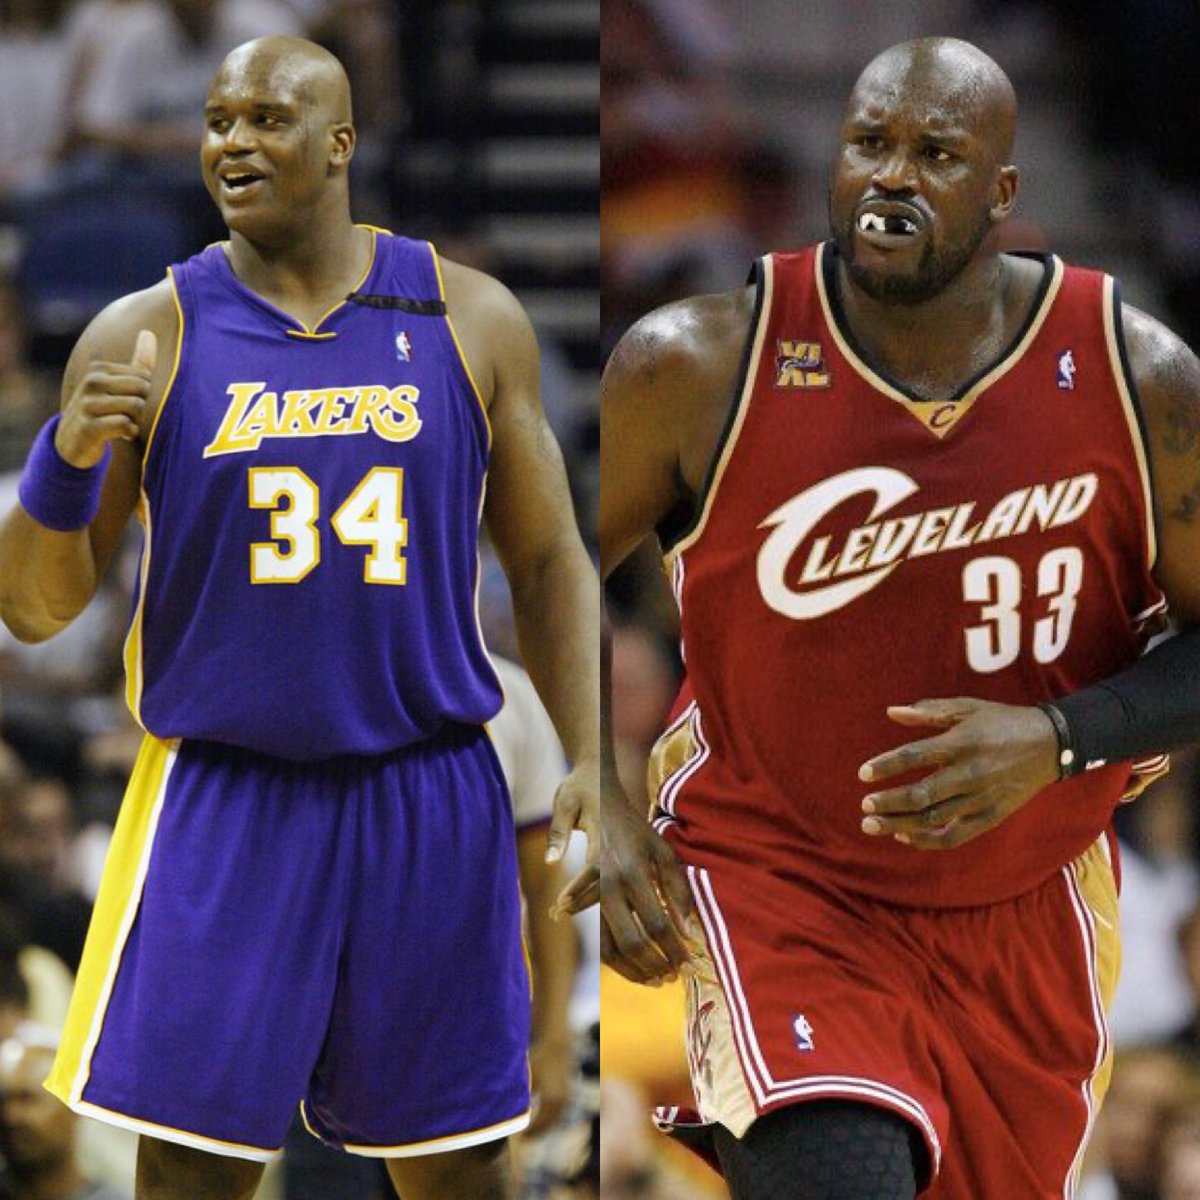 The amount of shared history between the Cavs and Lakers is crazy. No wonder they’ve combined for 17 NBA titles.